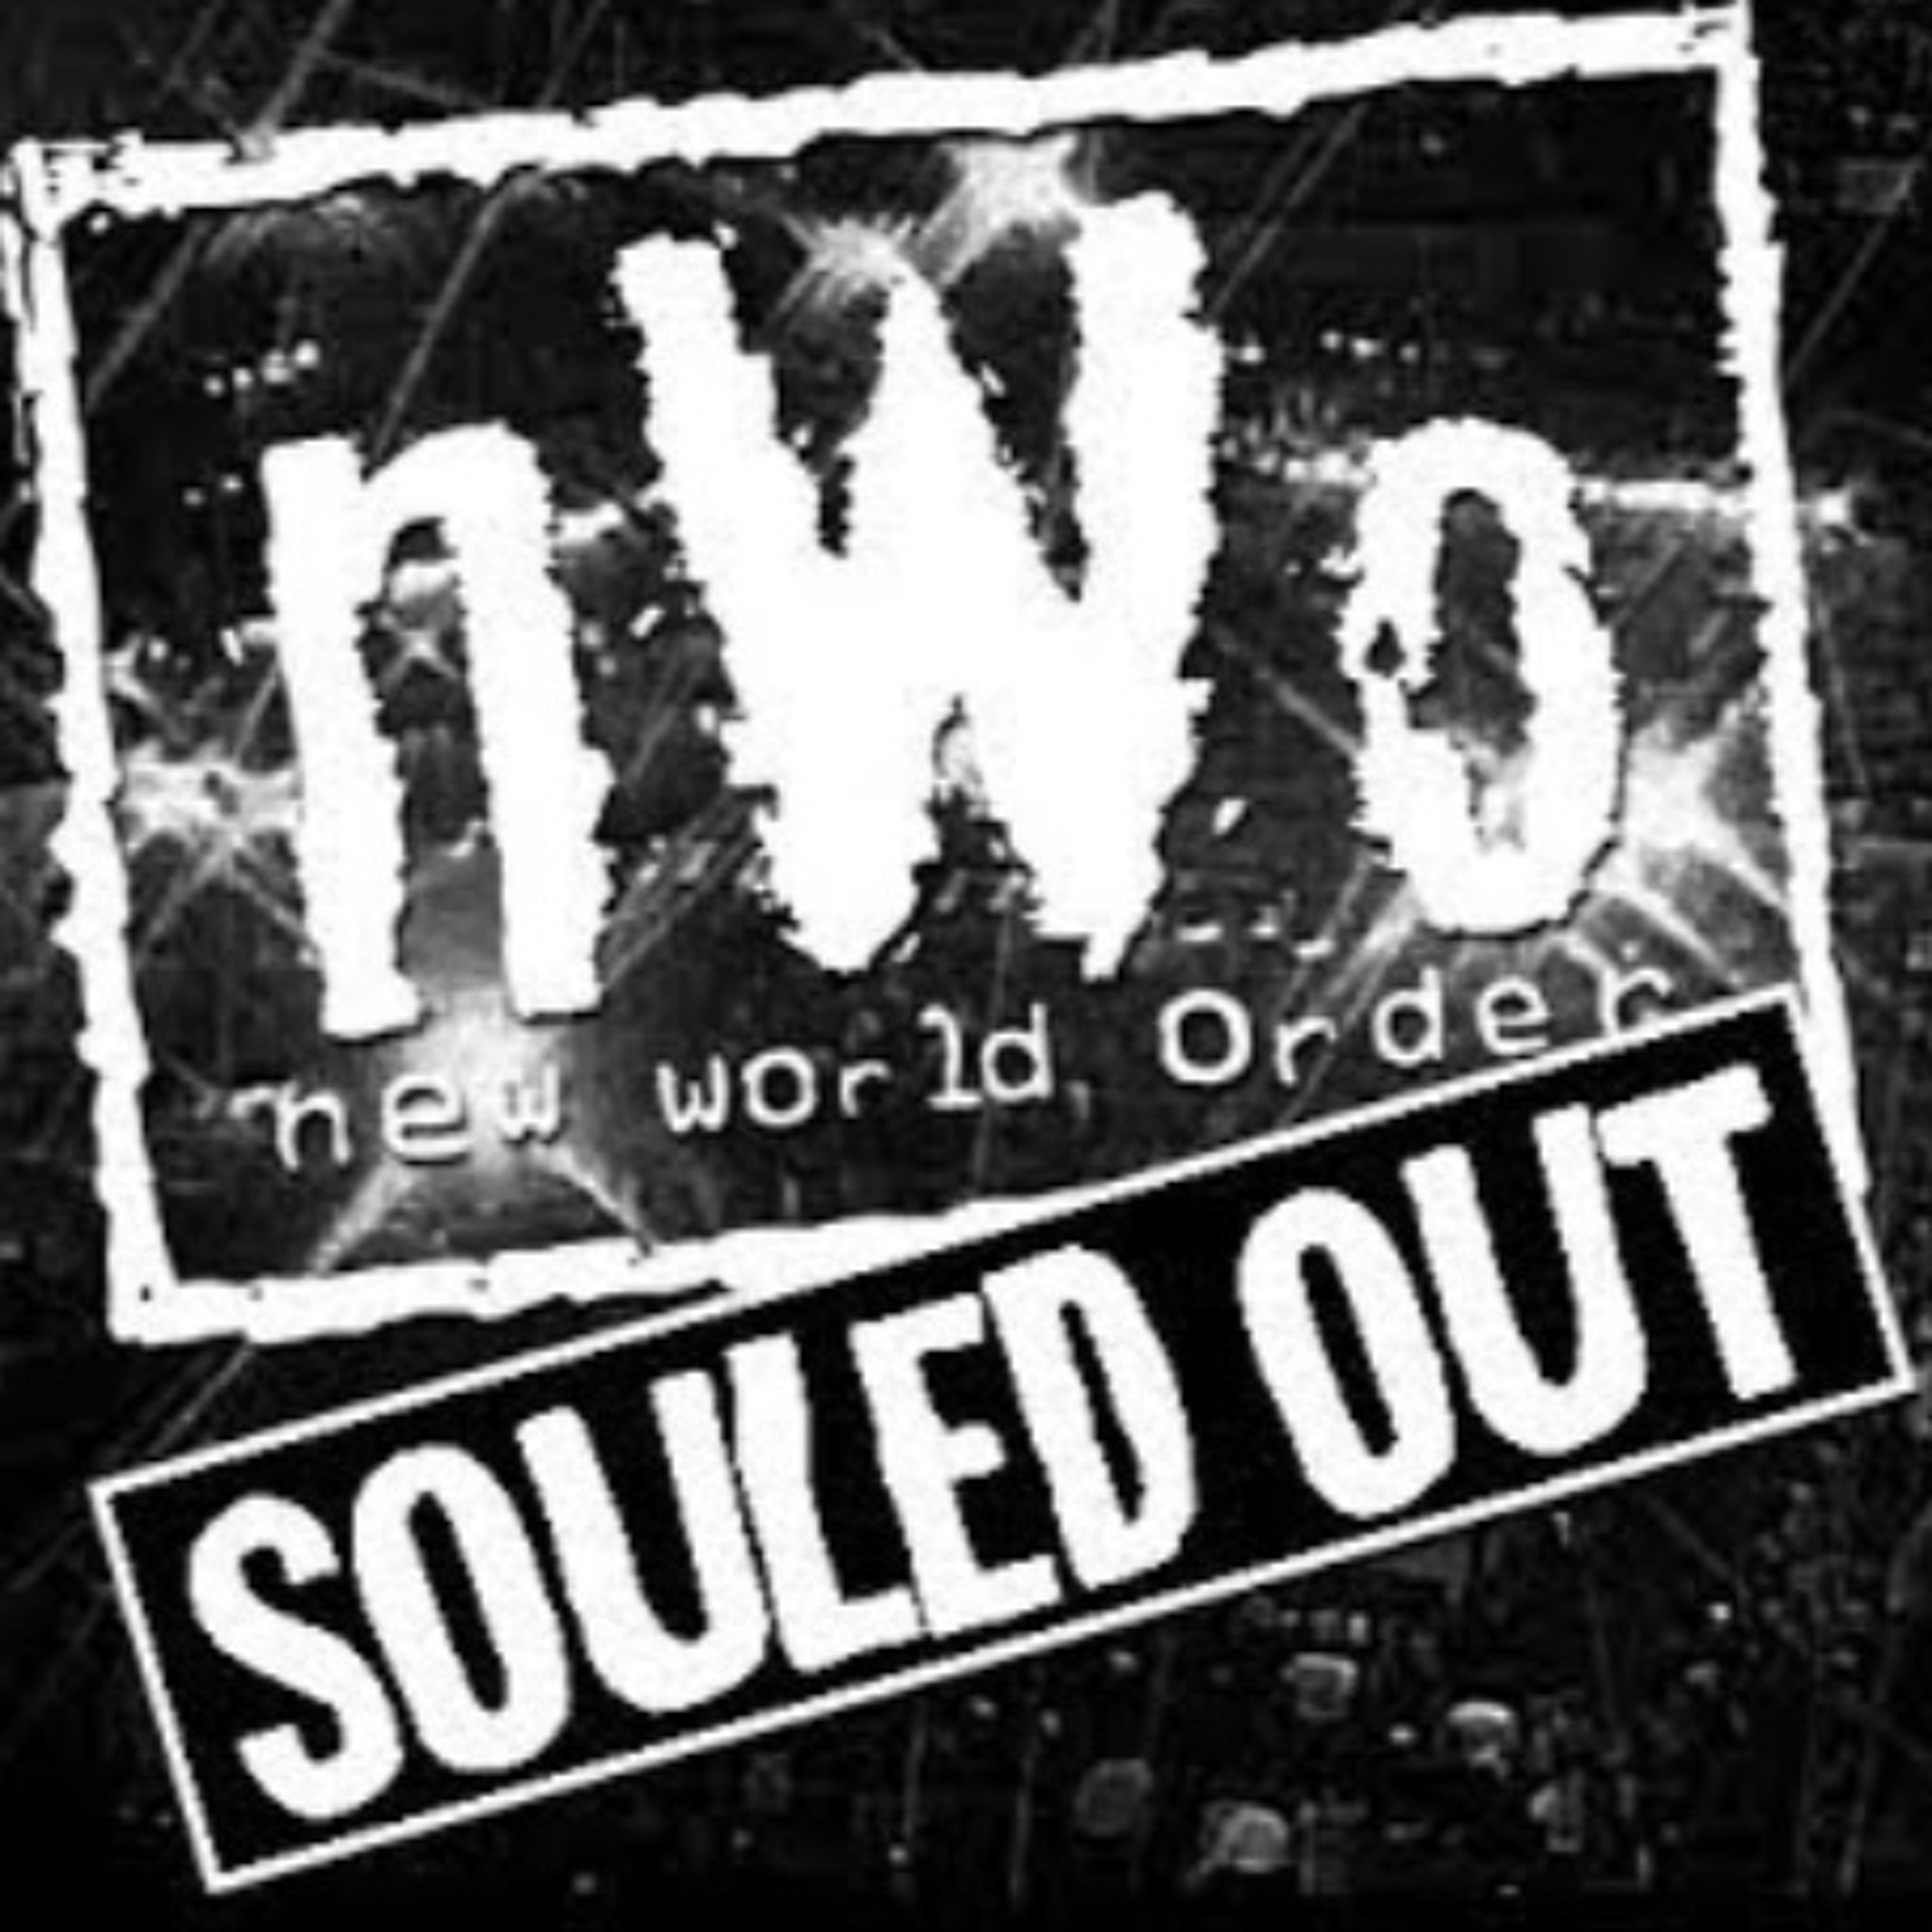 Episode 71.99 - nWo Souled Out - 1.25.97 (with Katy Vella)